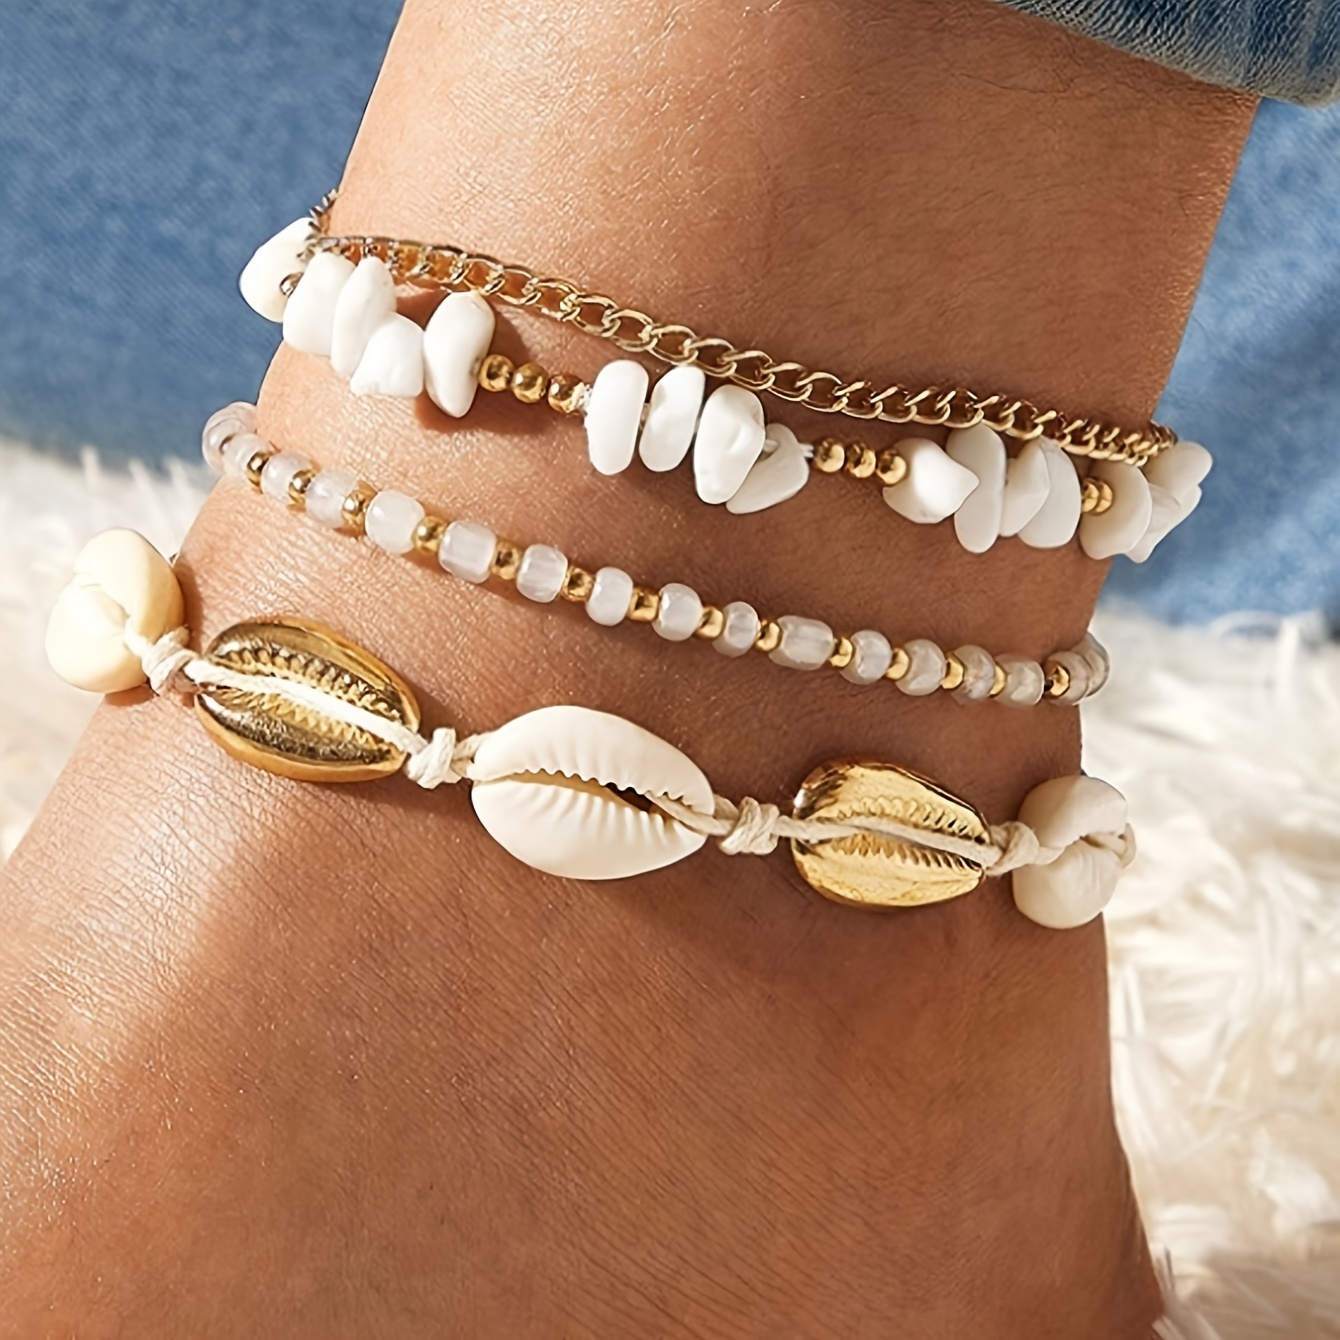 

4 Pcs Set Of Delicate Shell Imitation Pearl Design Anklet Bohemian Vintage Style For Women Summer Beach Foot Decor